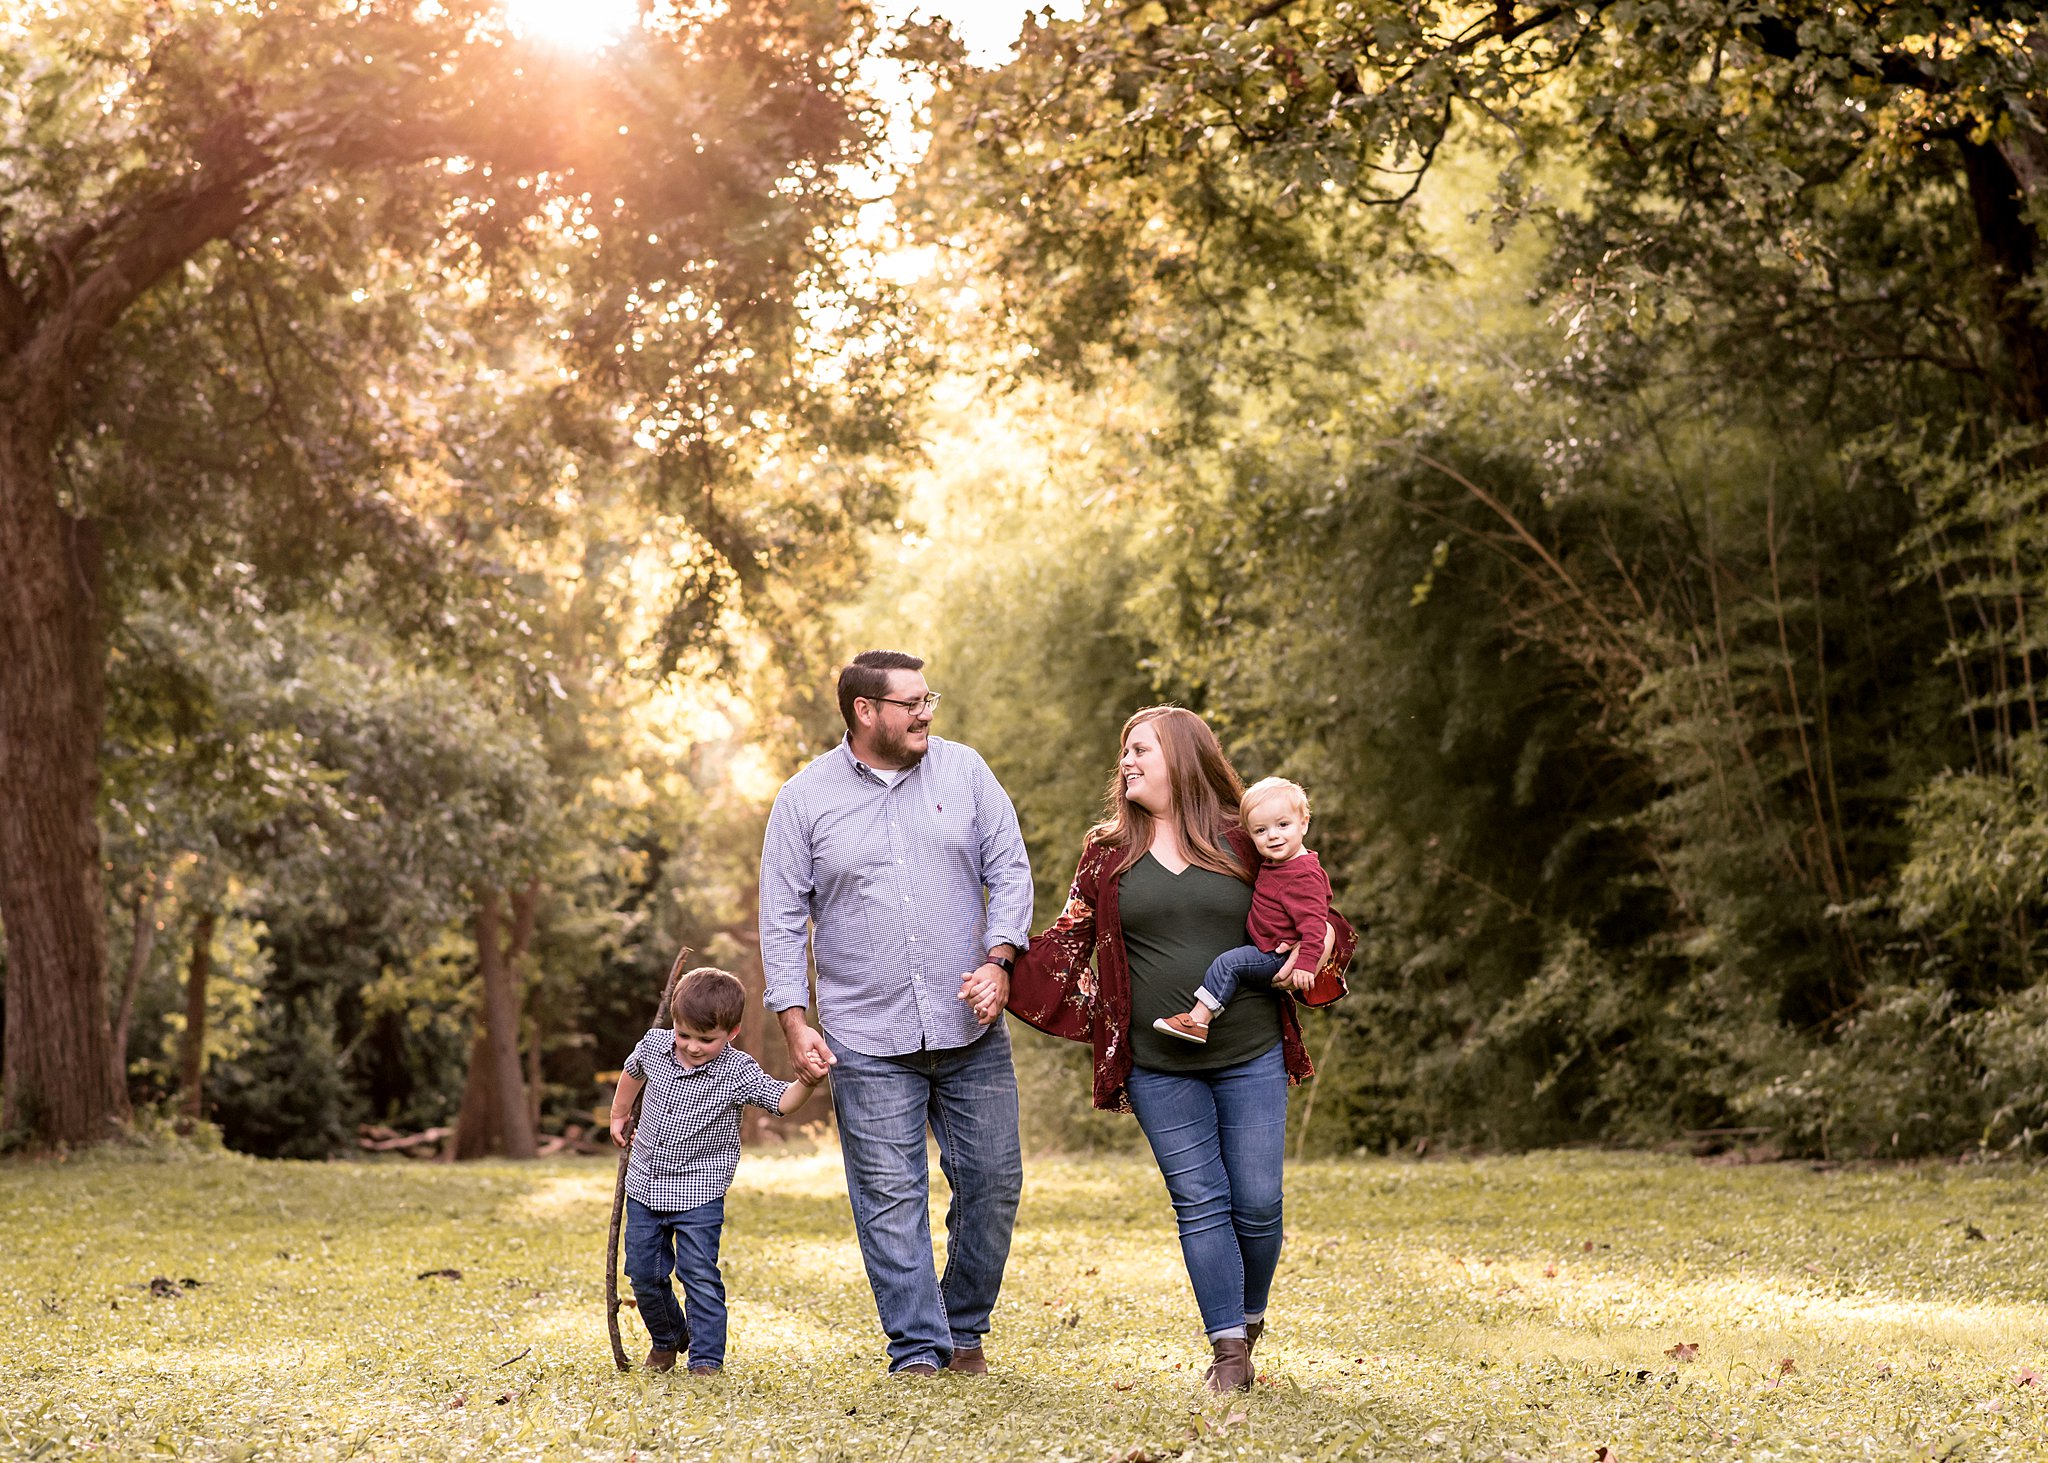 A mom with a young toddler on her hip walks through a grassy park field with her husband and older son waco homeschool co op